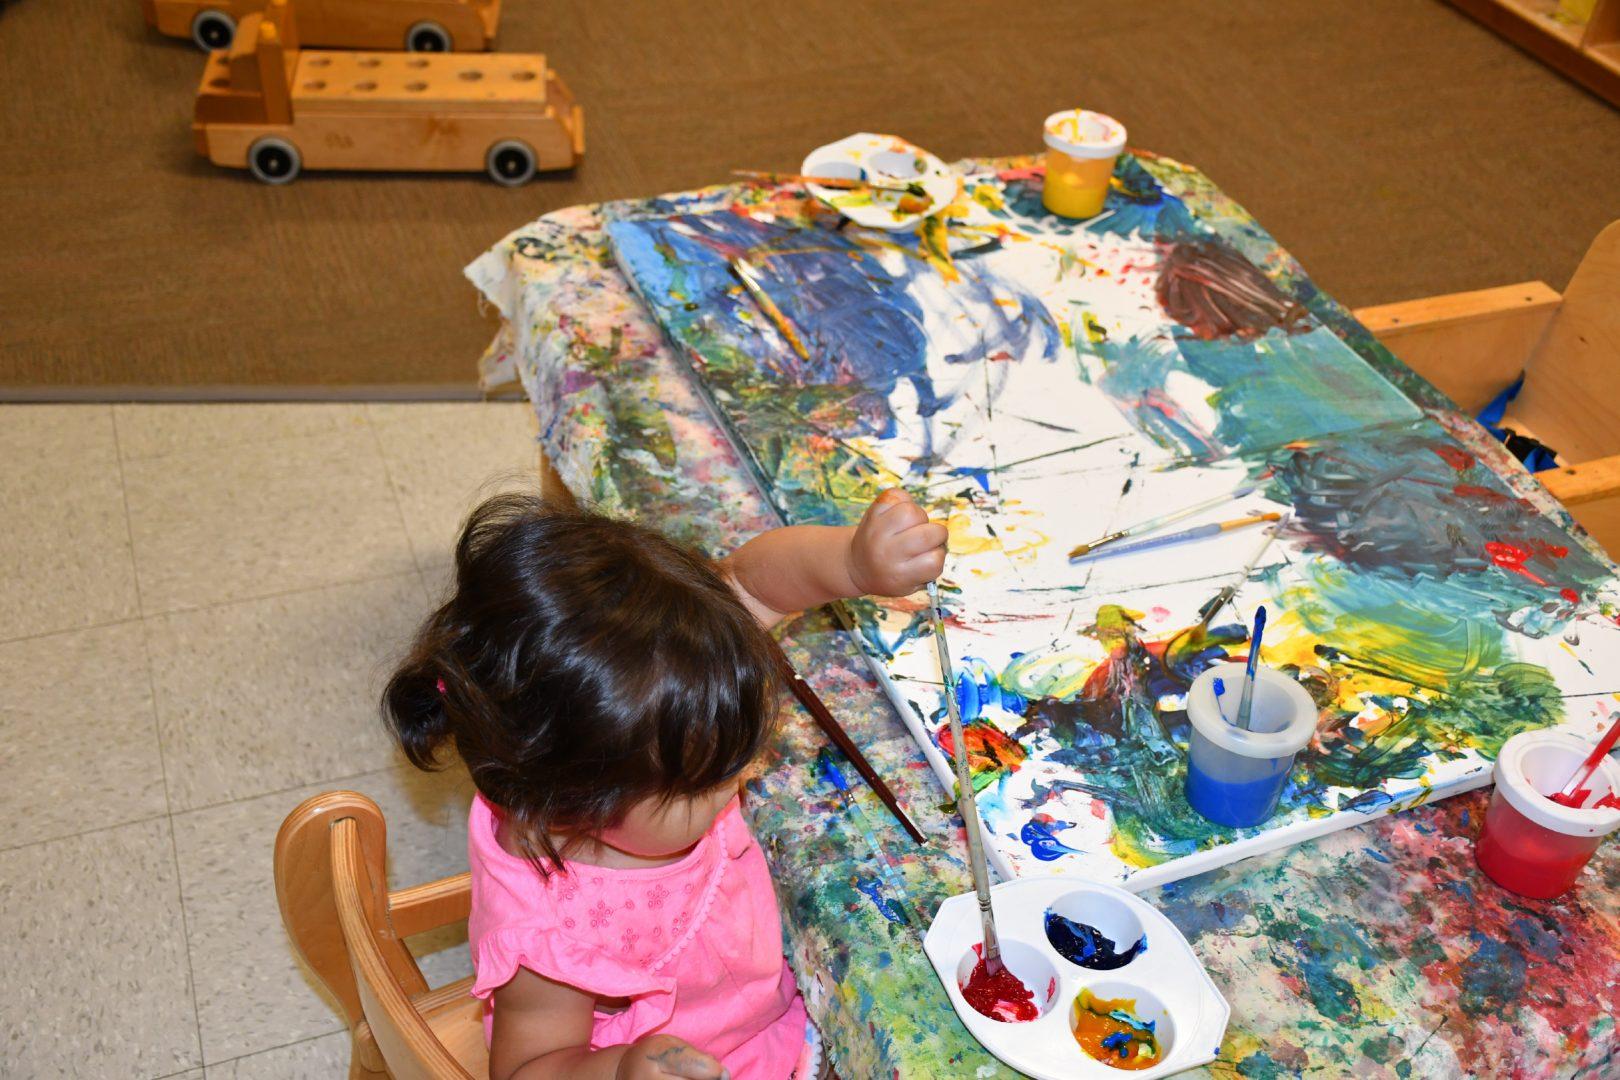 A+child+explores+with+paint.+Fresno+State+is+expanding+an+infant+center+to+make+room+for+more+children+in+an+attempt+to+meet+the+growing+needs+of+students+and+staff.+%28Connie+Mosher%2C+Master+Teacher+at+the+Joyce+M.+Huggins+Early+Education+Center%29